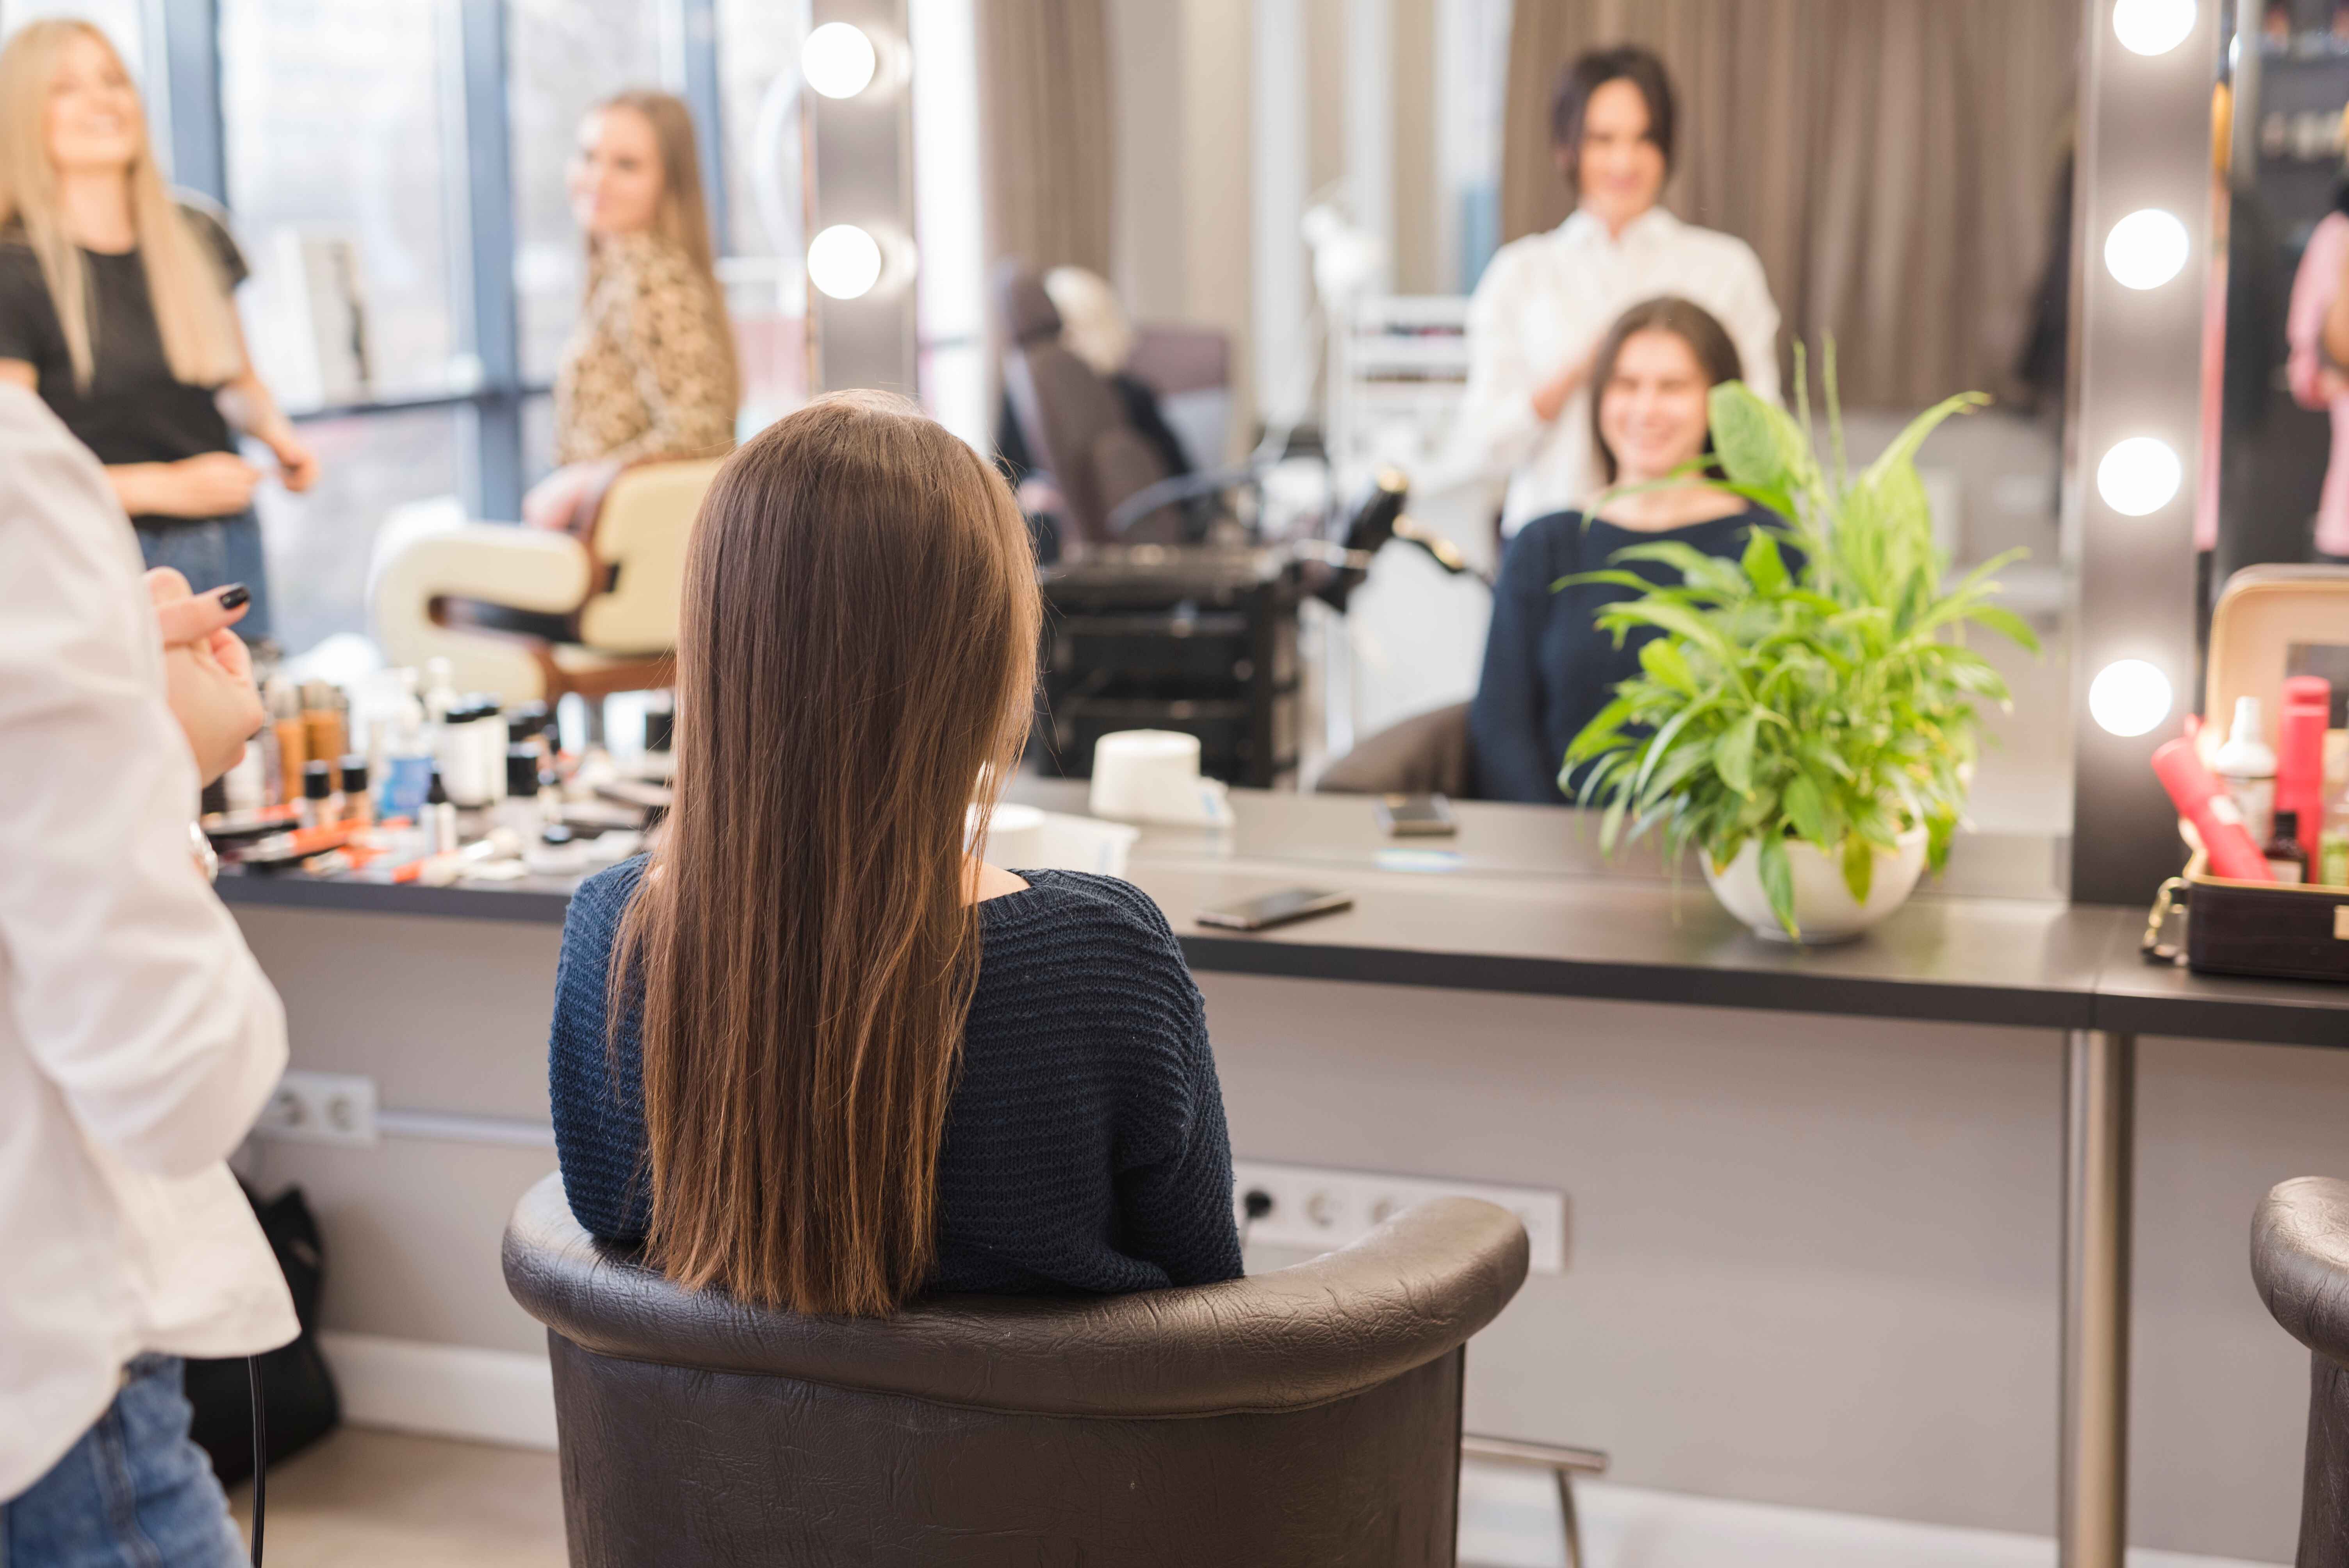 Salon Studios in Duluth: What to Look for When Renting